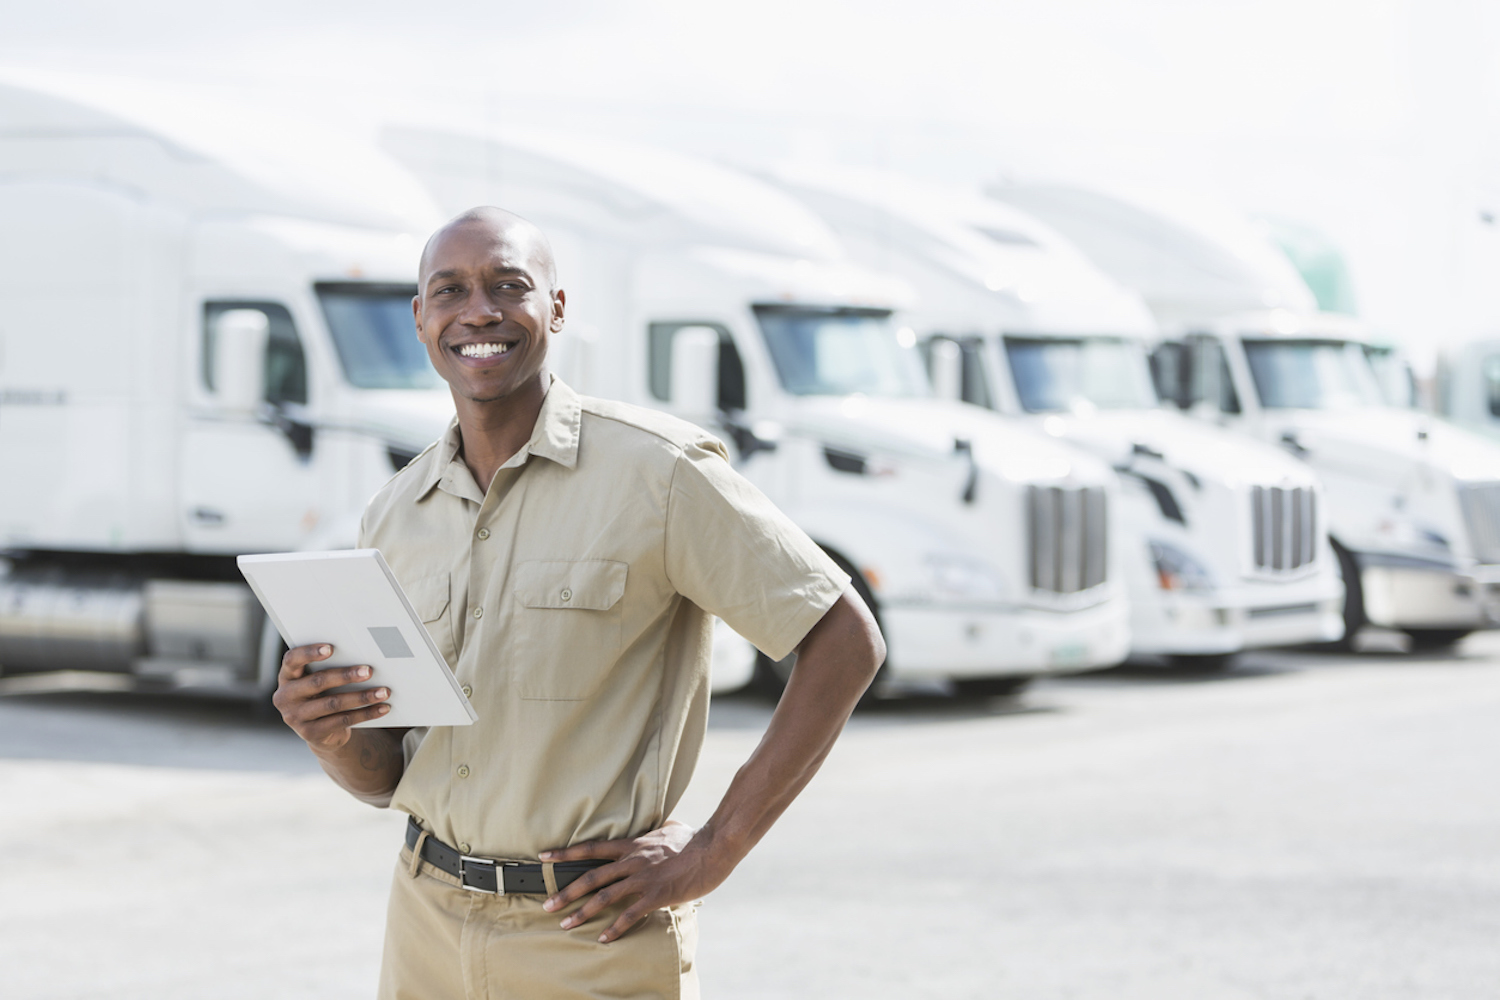 smiling man with computer tablet, standing in front of trucks